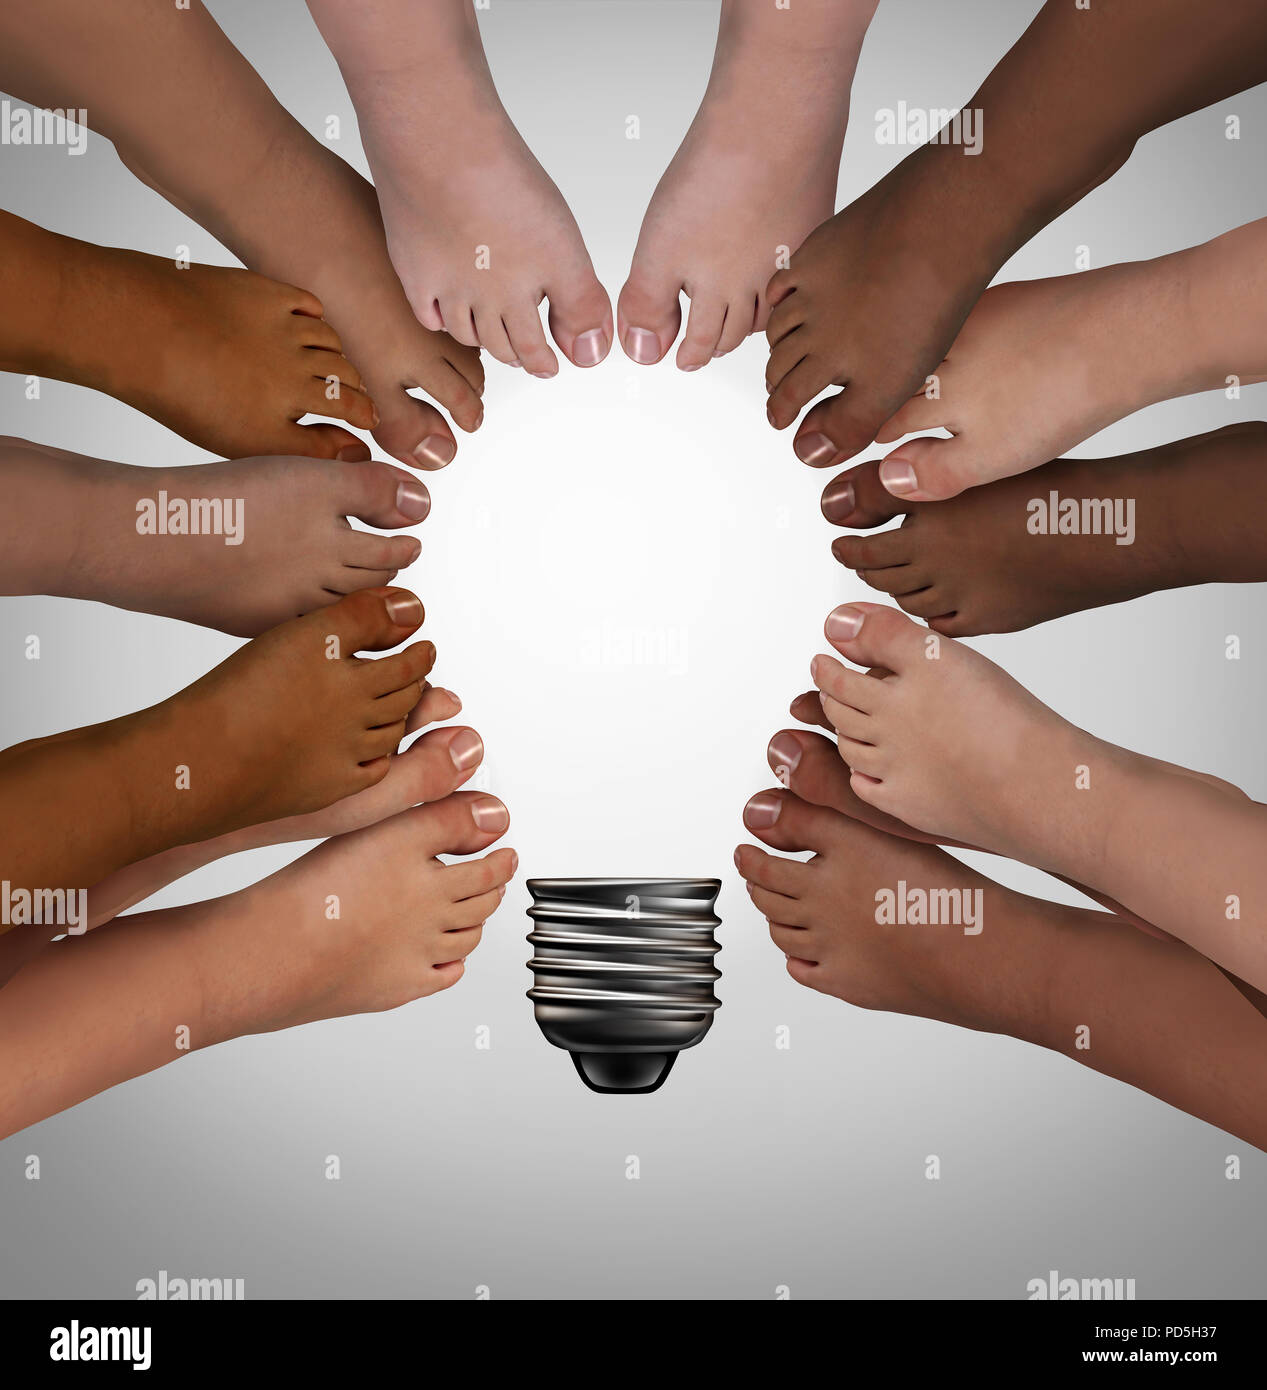 Diversity standing together as diverse people thinking as a team joining feet into the shape of an inspirational light bulb as a community support. Stock Photo